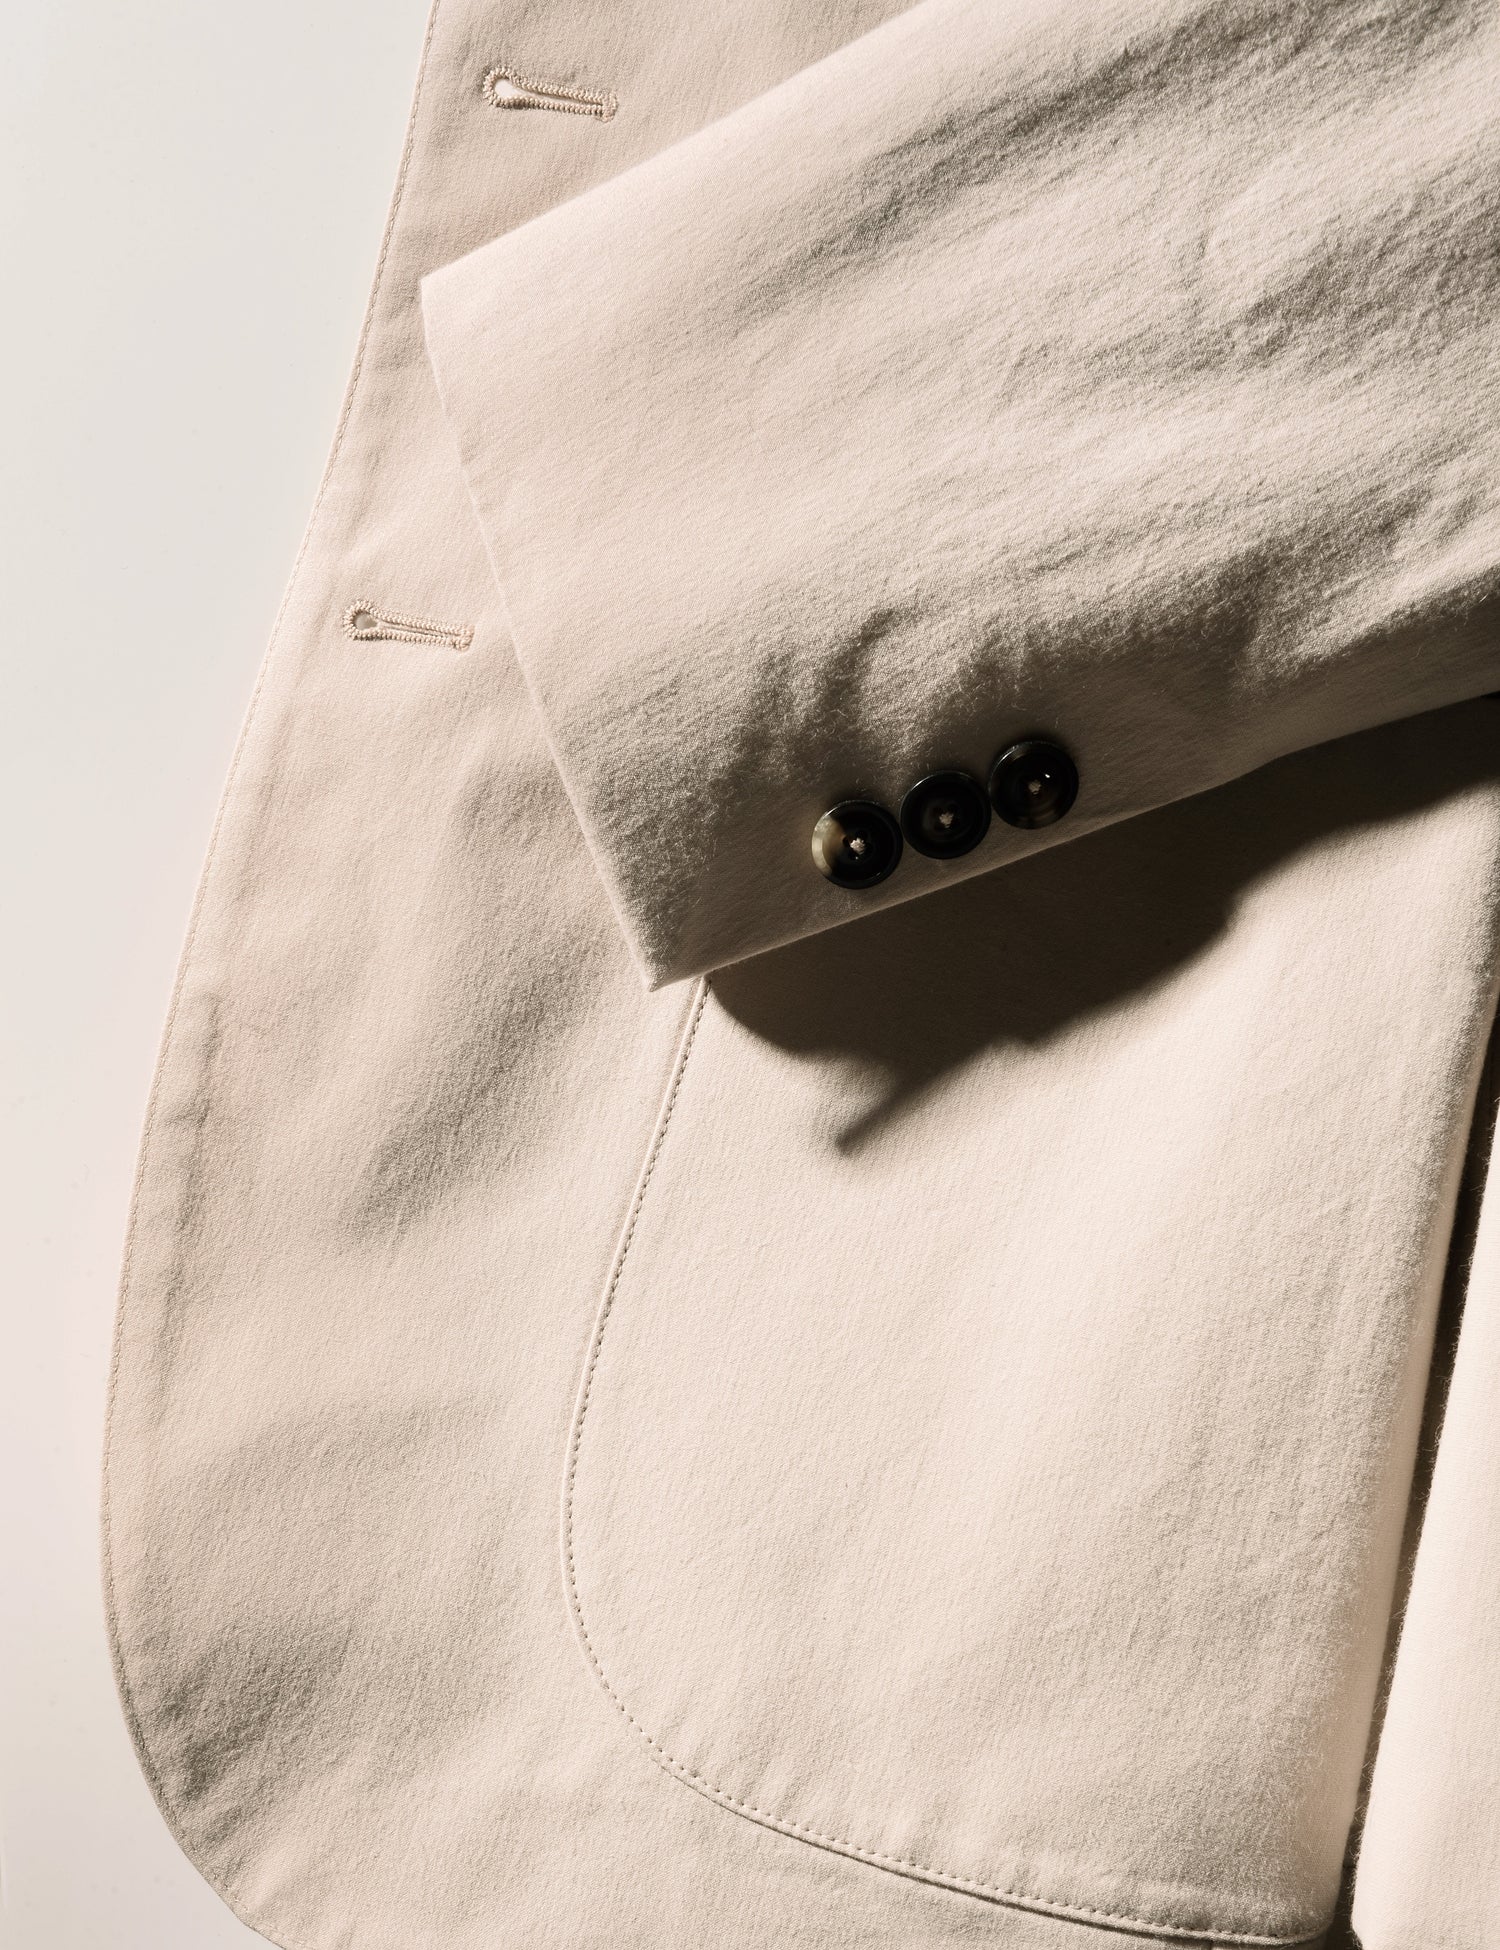 Detail shot of cuff, patch pocket, buttonholes, and fabric texture on Brooklyn Tailors BKT35 Unstructured Jacket in Crisp Cotton Blend - Desert Sand